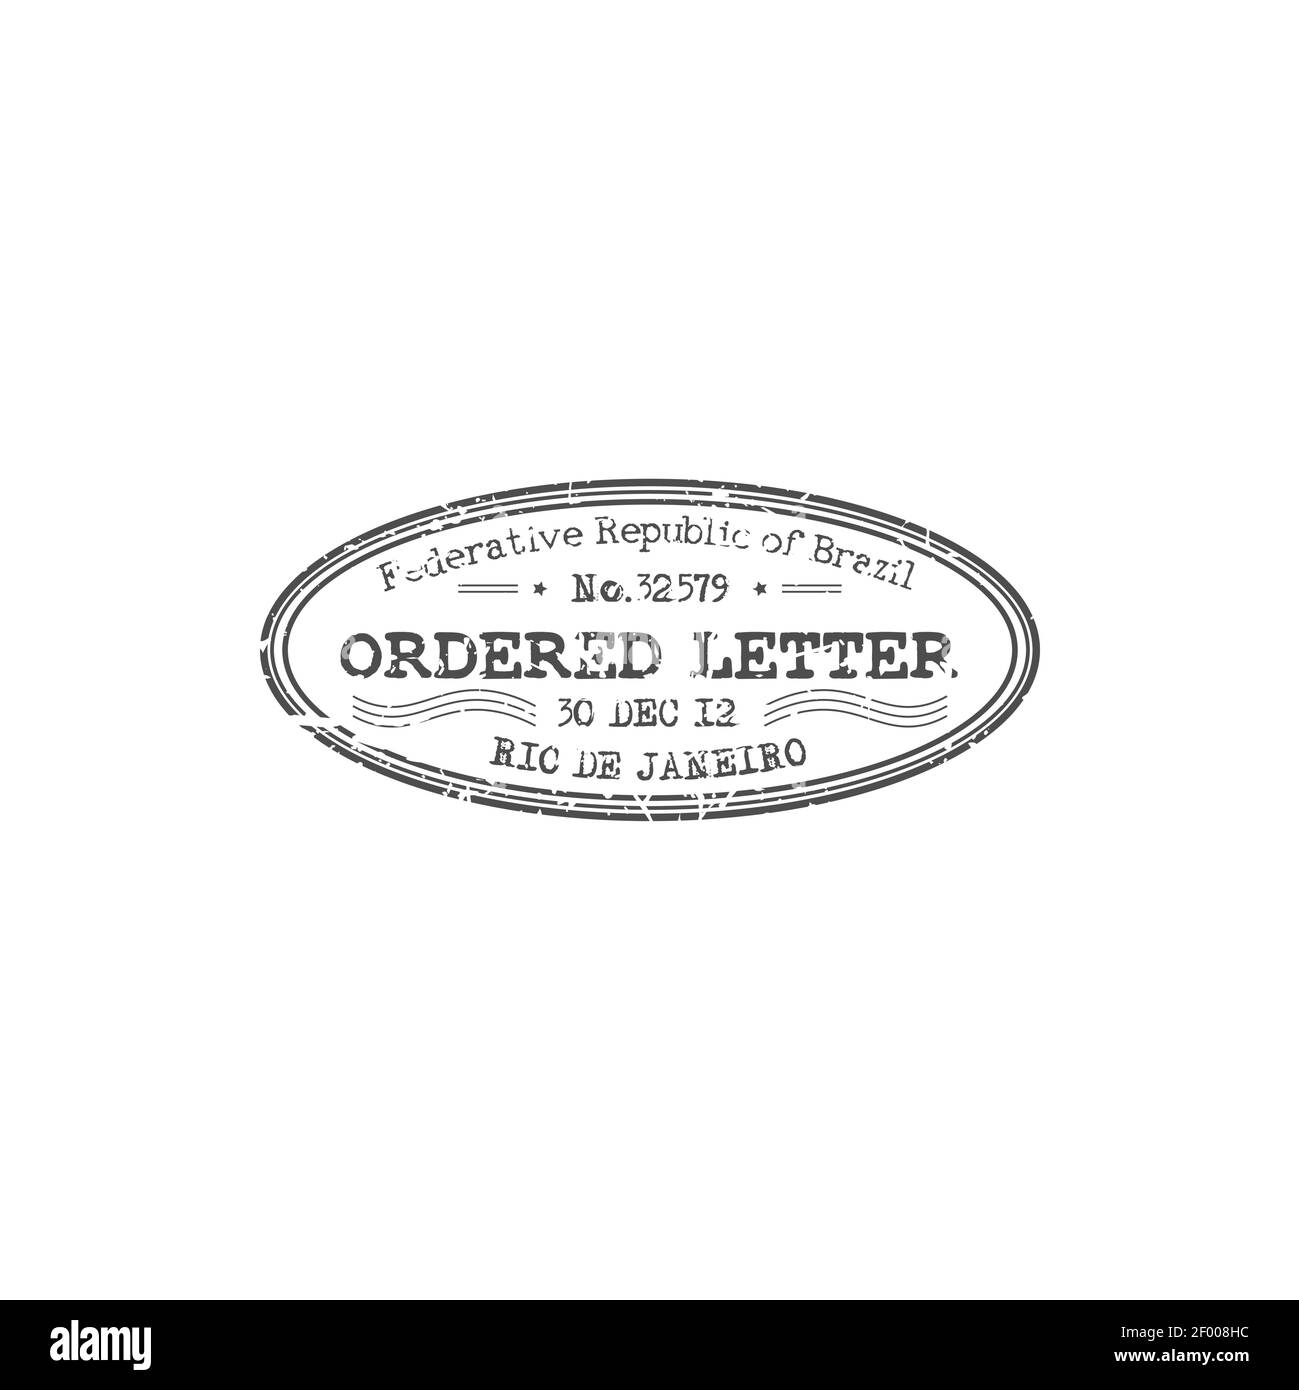 Ordered Letter Stamp Of Federative Republic Of Brazil Isolated Template Vector Rio De Janeiro 9243